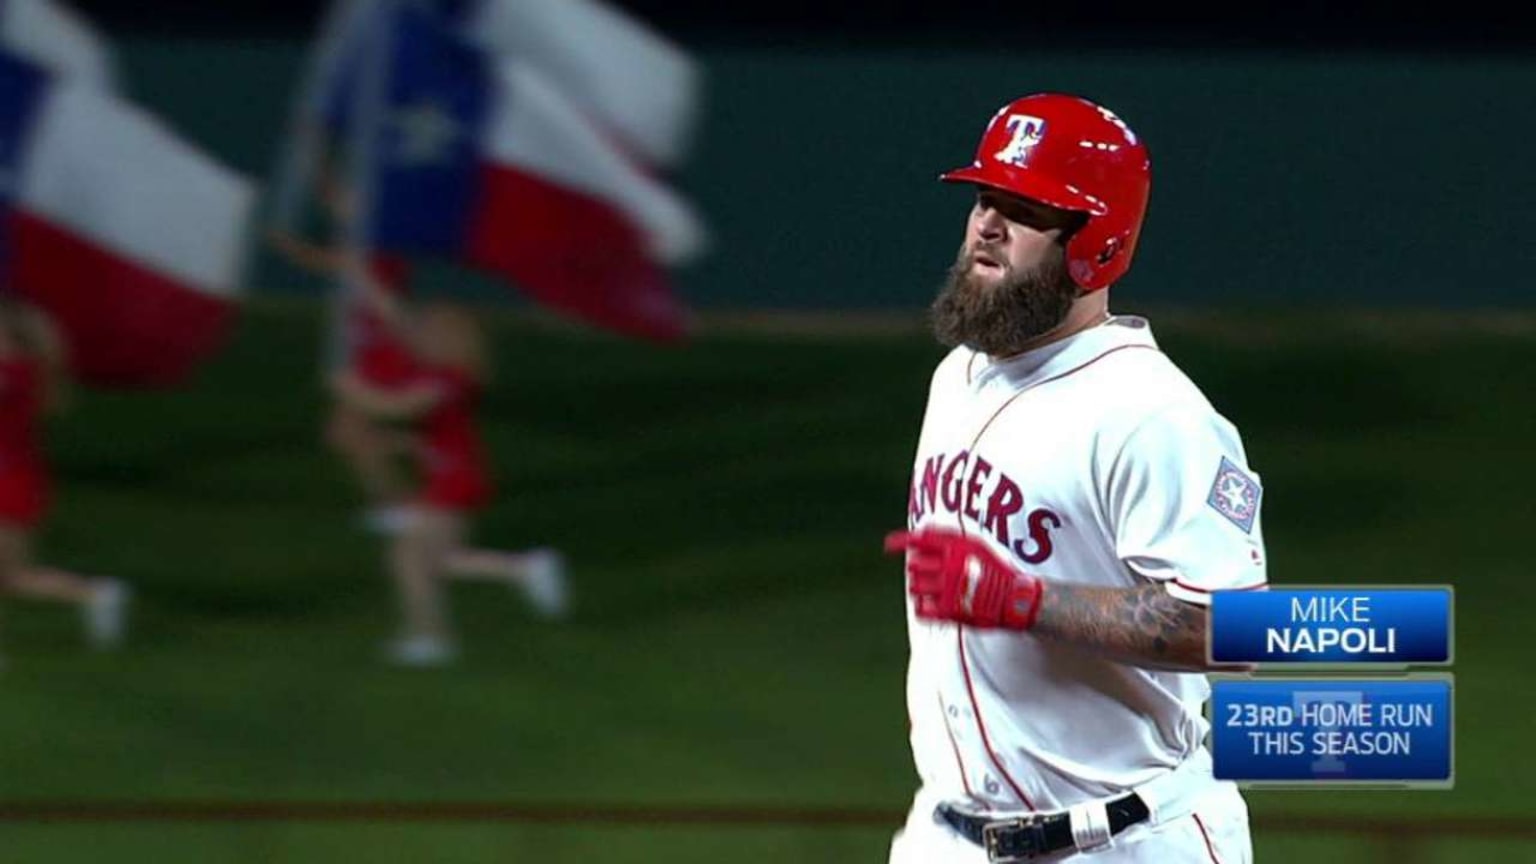 Texas Rangers' Mike Napoli continues tear in World Series, making